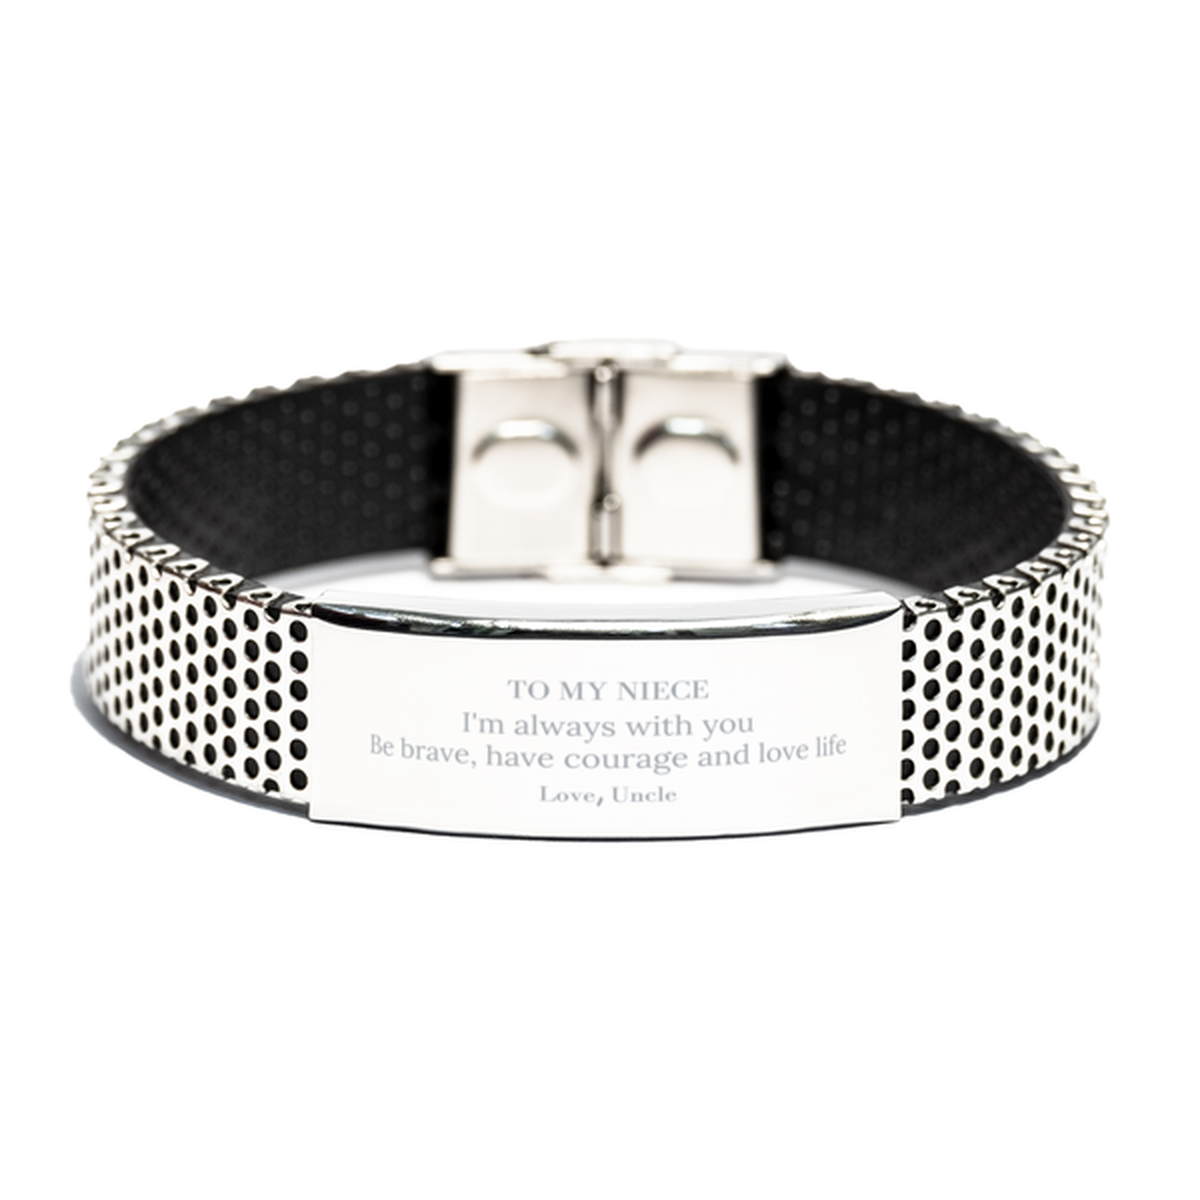 To My Niece Gifts from Uncle, Unique Stainless Steel Bracelet Inspirational Christmas Birthday Graduation Gifts for Niece I'm always with you. Be brave, have courage and love life. Love, Uncle